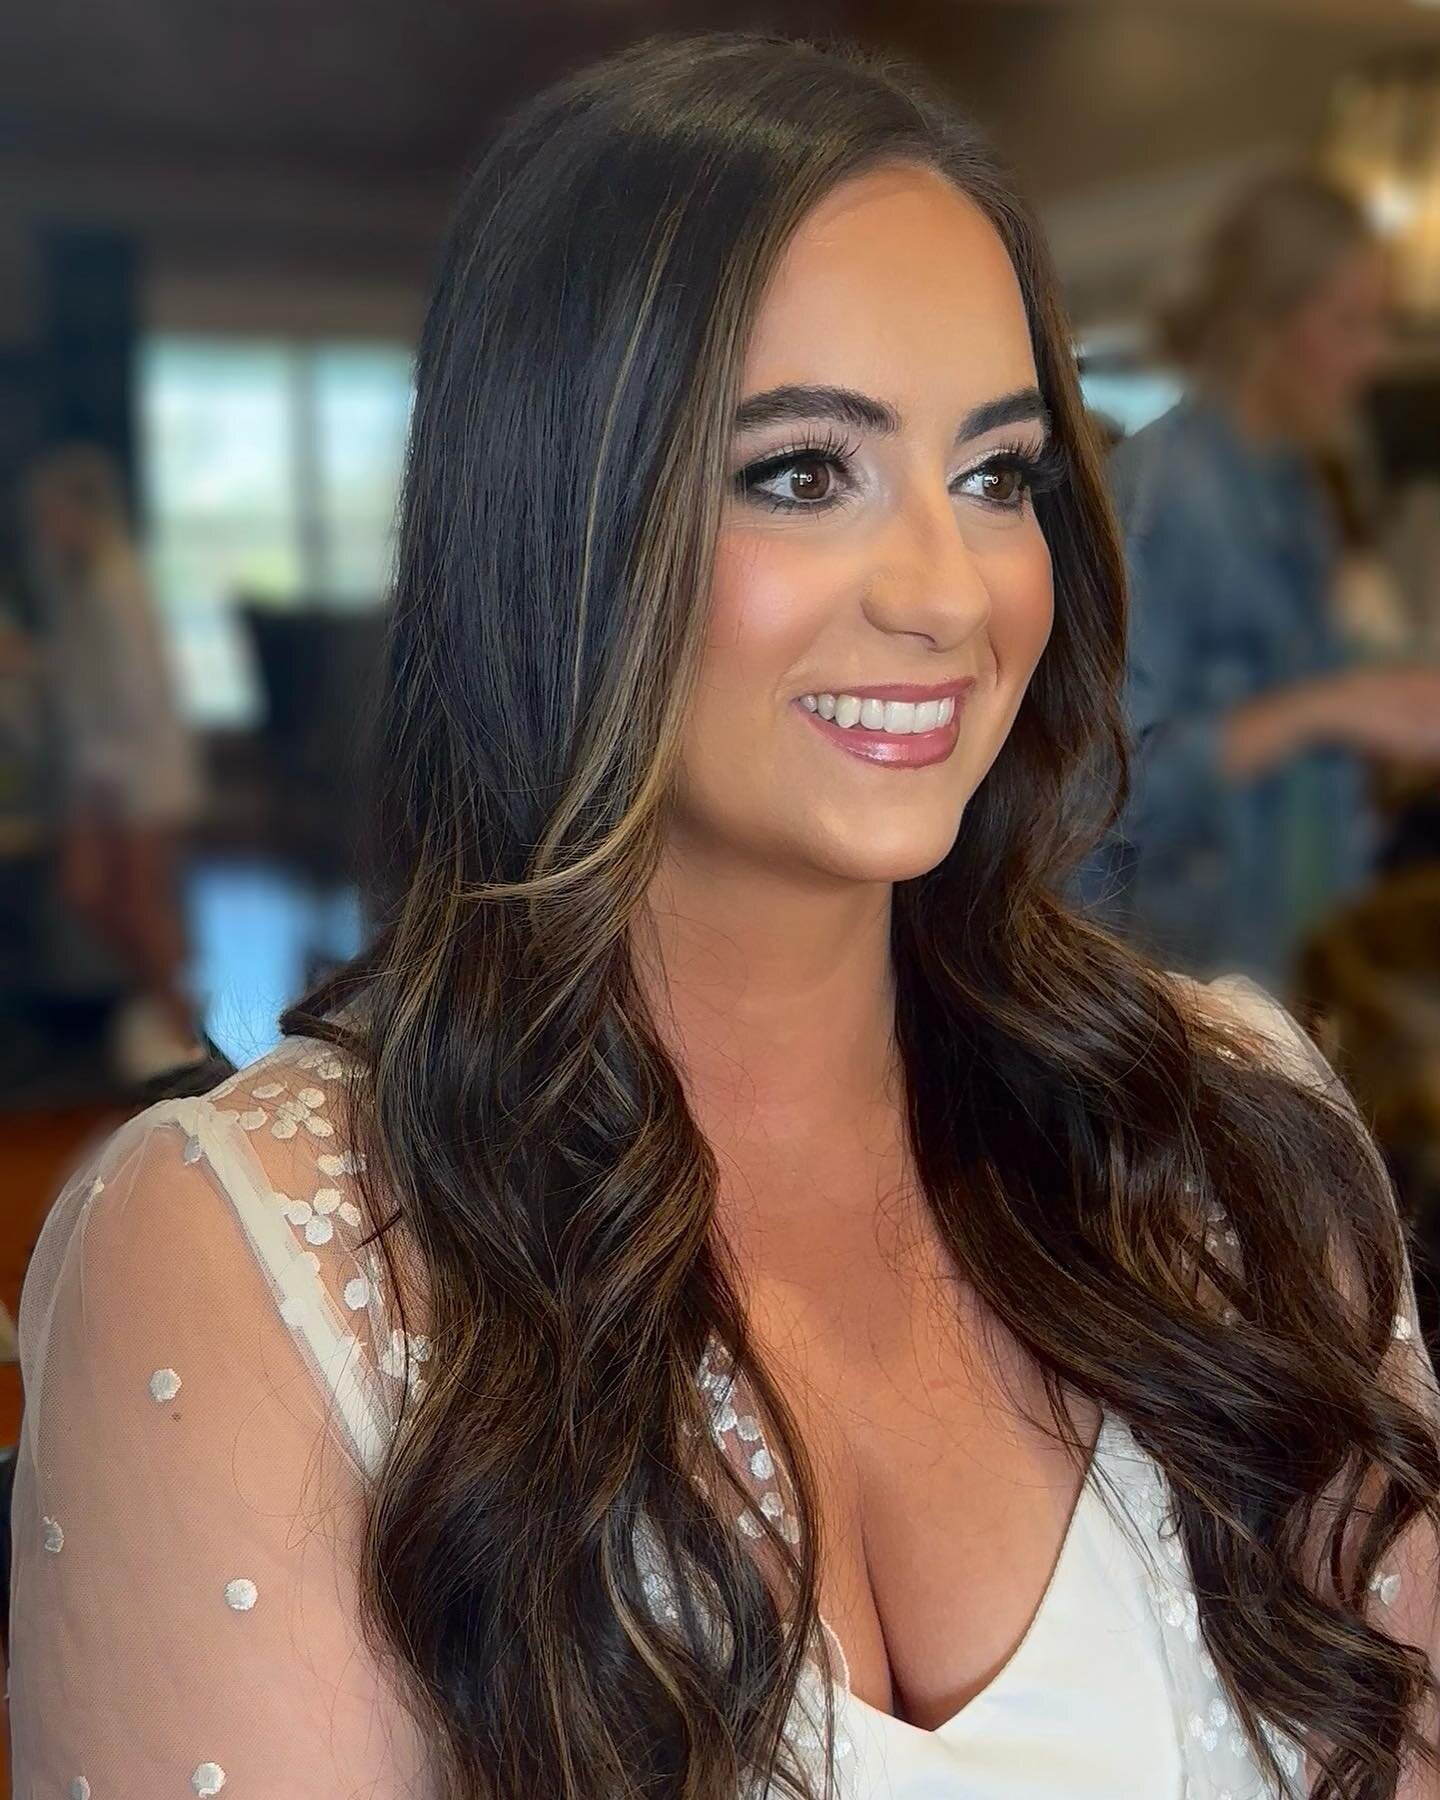 Todays bridal beauty - @a_brunner ✨ 
.
Allison had the most flawless skin, which is the KEY to flawless, glowy bridal makeup!! 
.
Finding an Esthetician months before your wedding and getting regular facials is a MUST!!! If you&rsquo;re a 2023 bride 